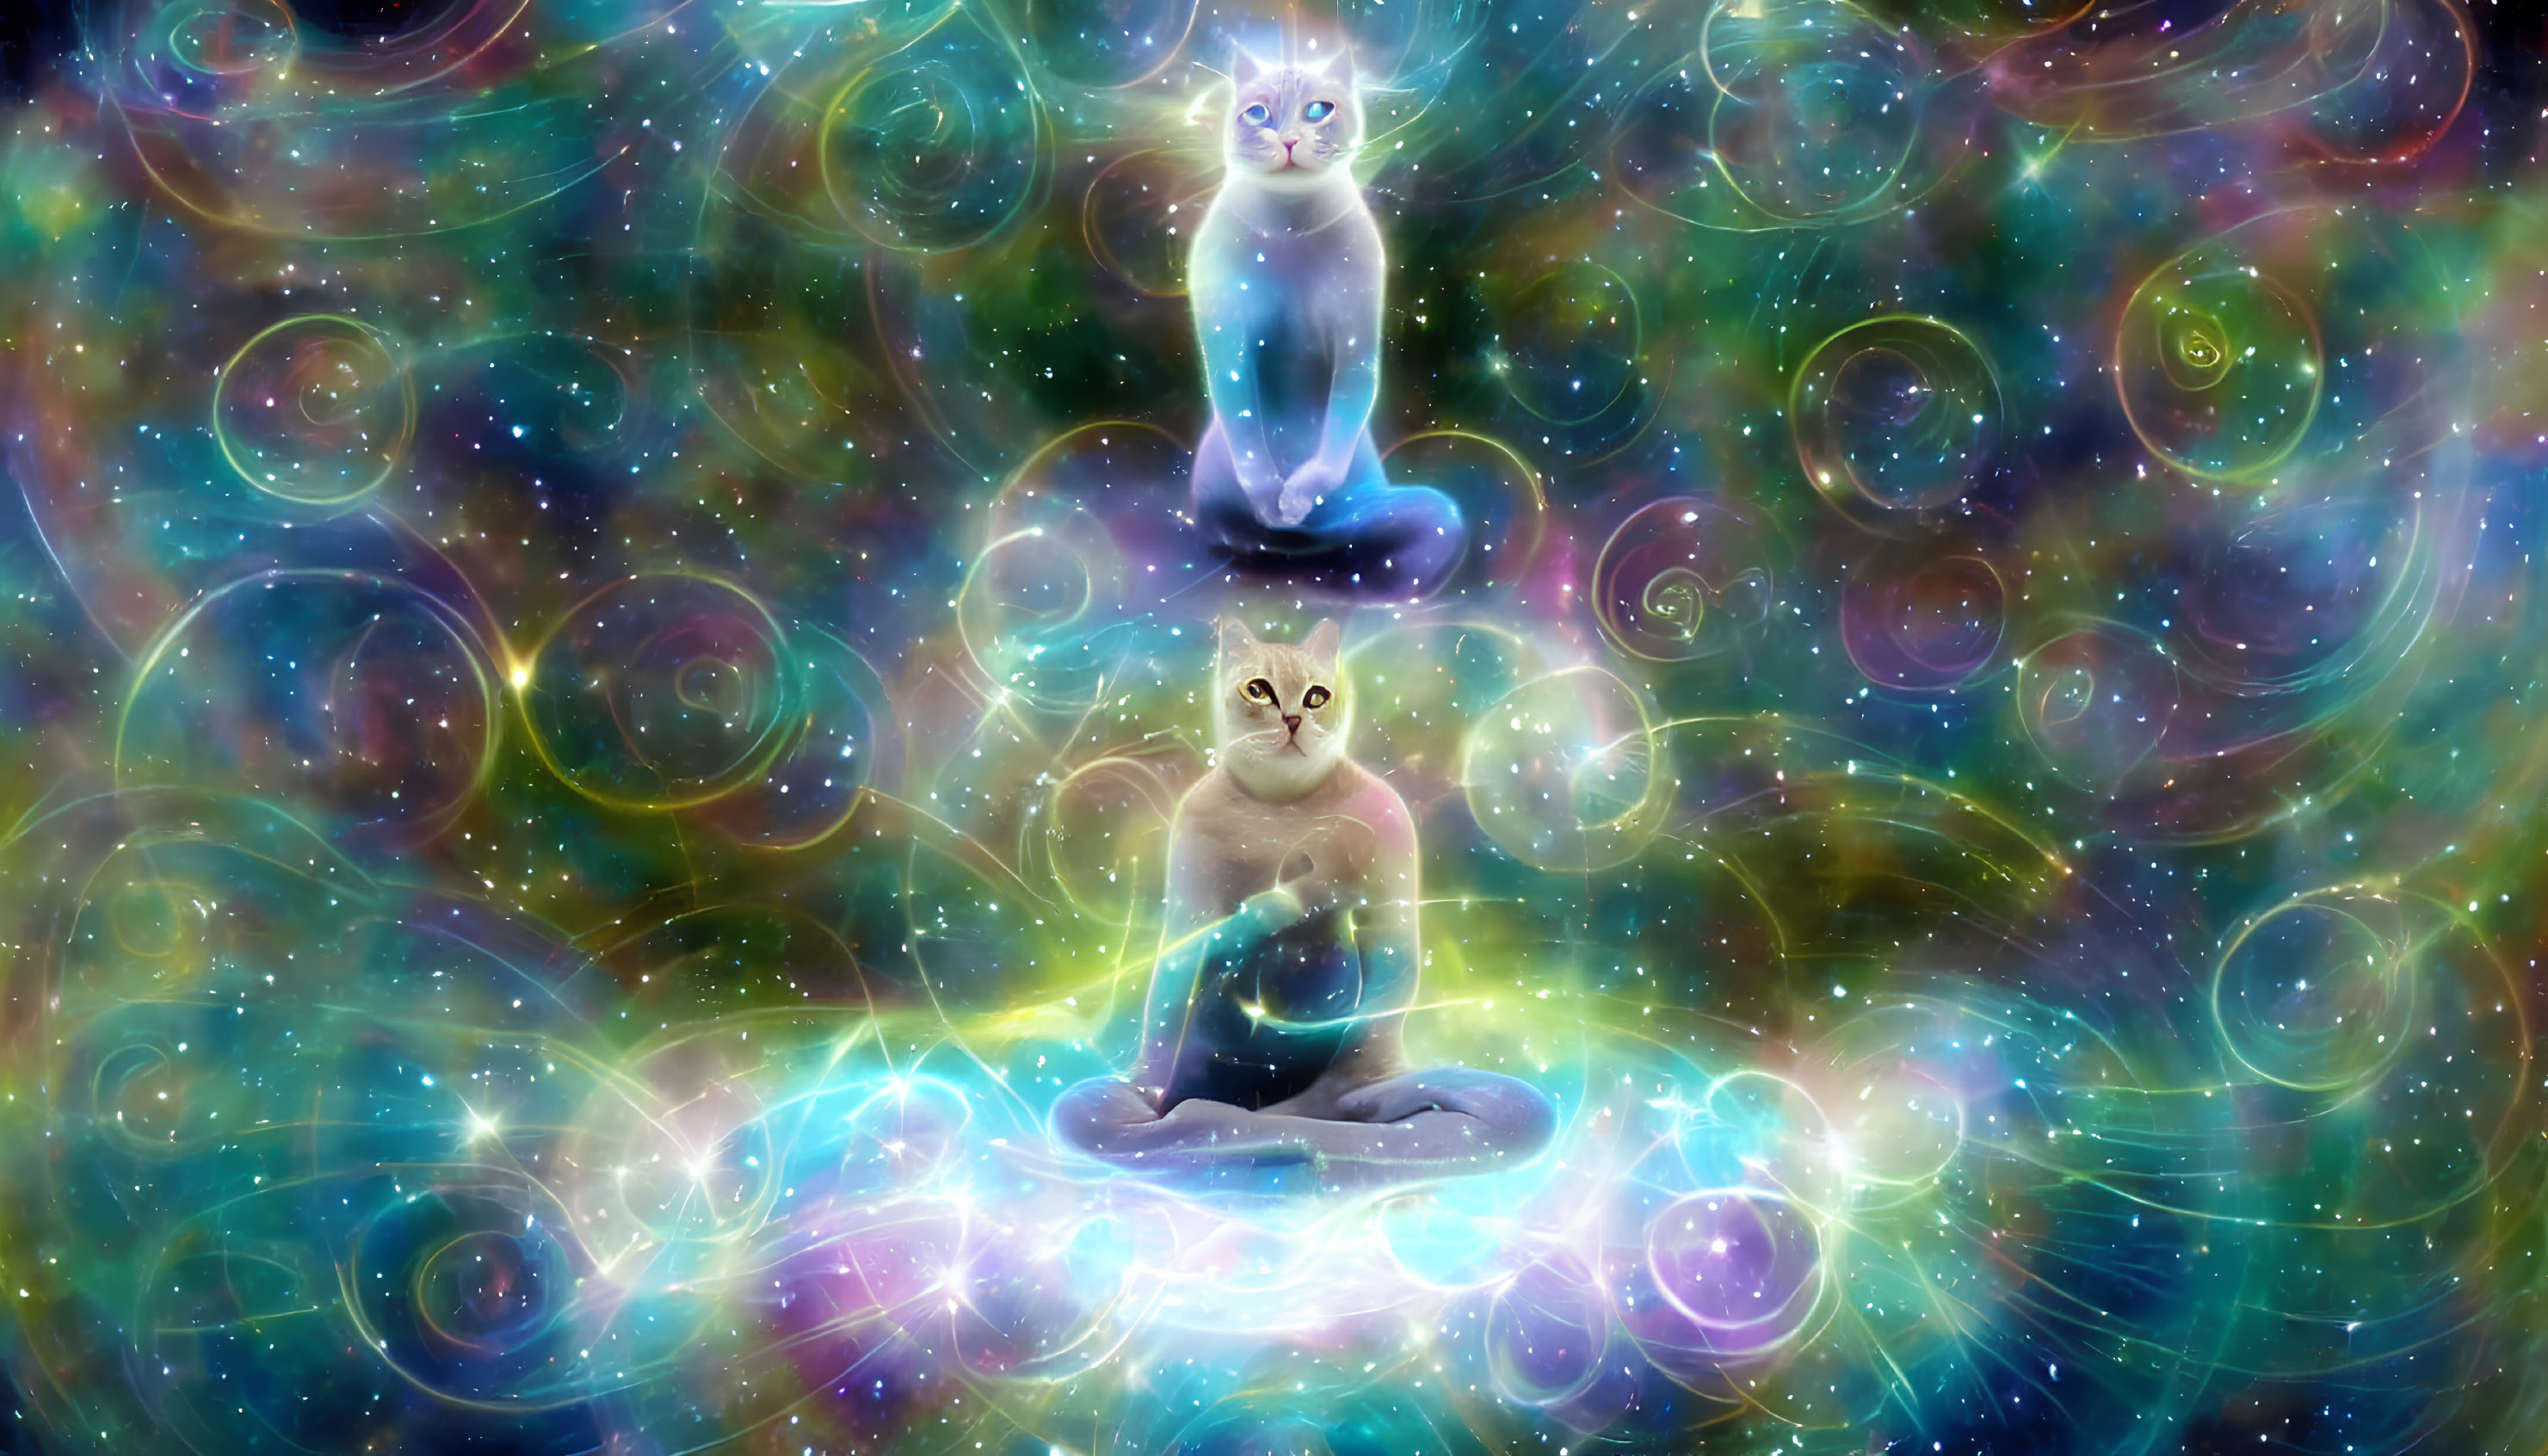 Fantasy-inspired image of two cats meditating in cosmic background